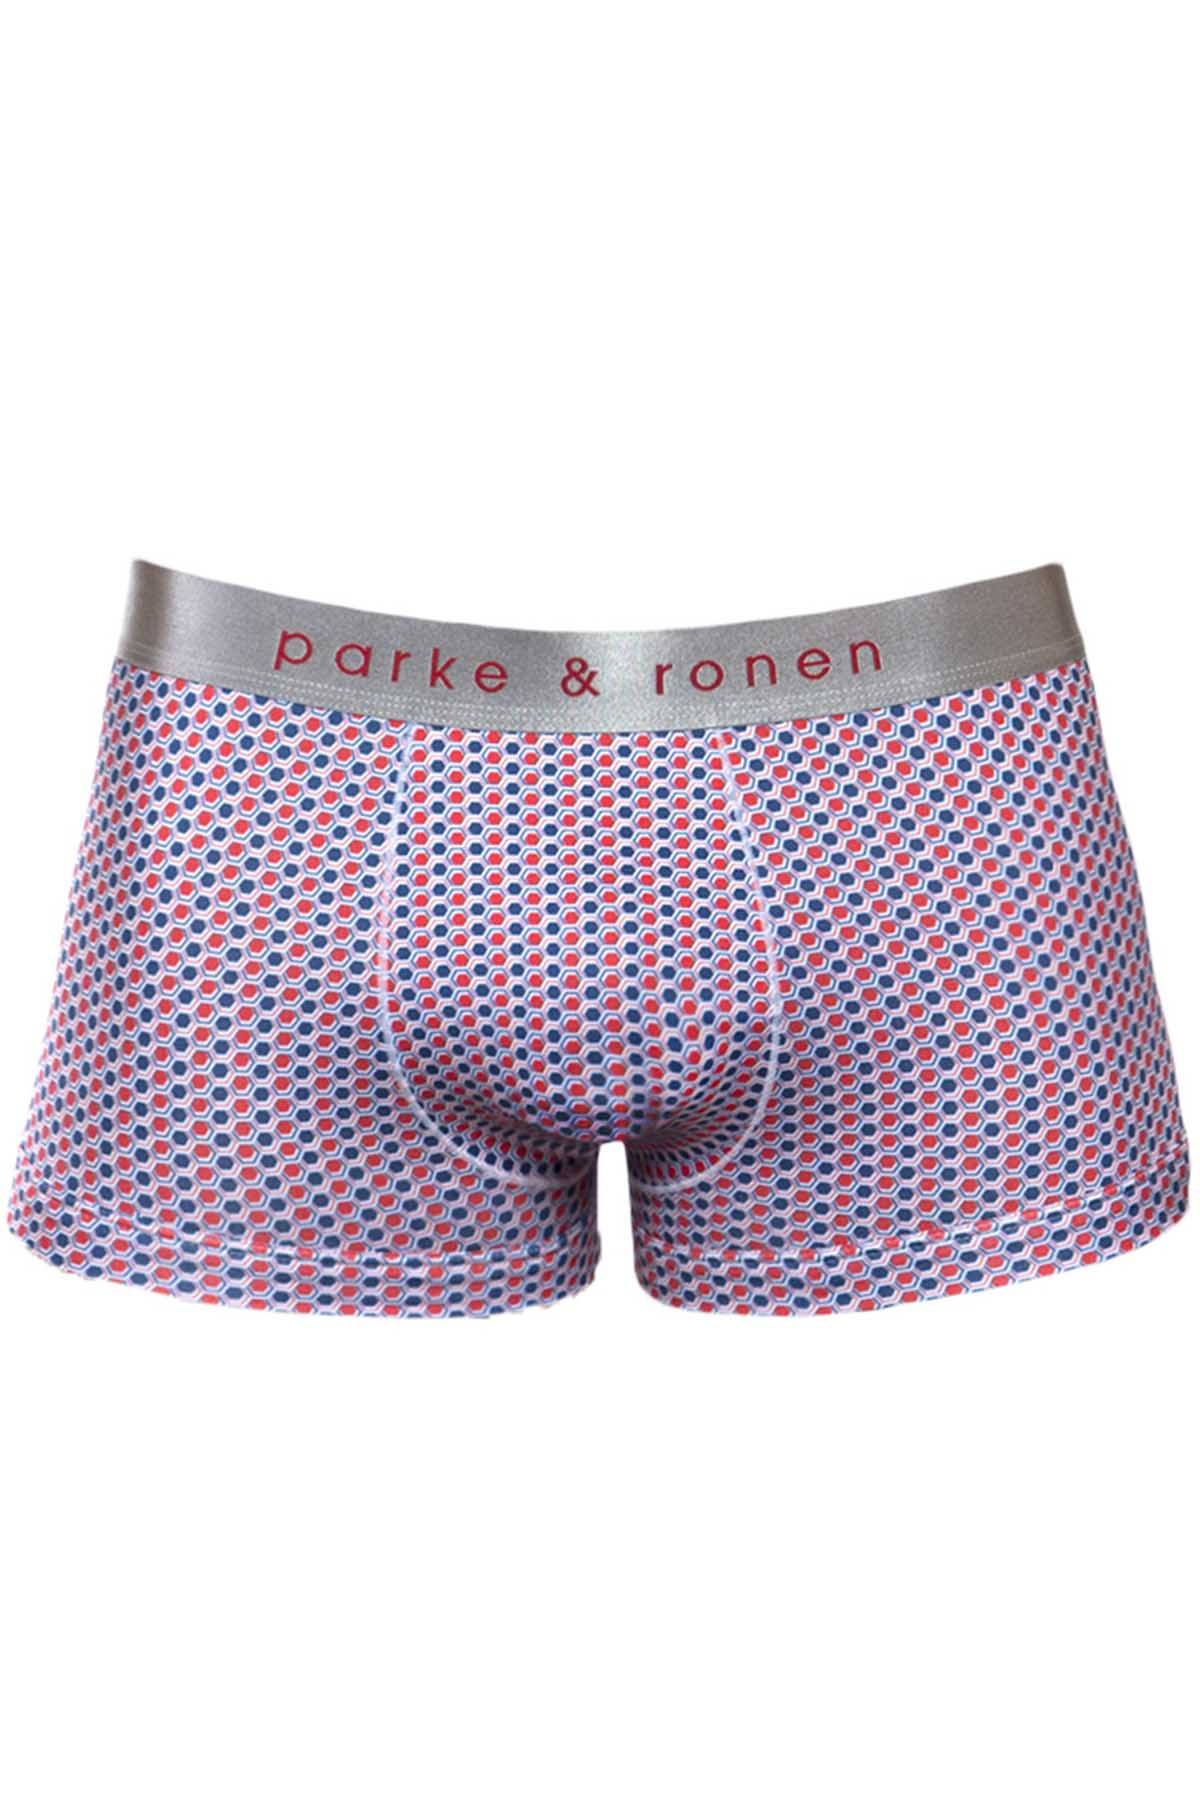 Parke & Ronen Cherry/Blue Printed Clipper Low-Rise Trunk